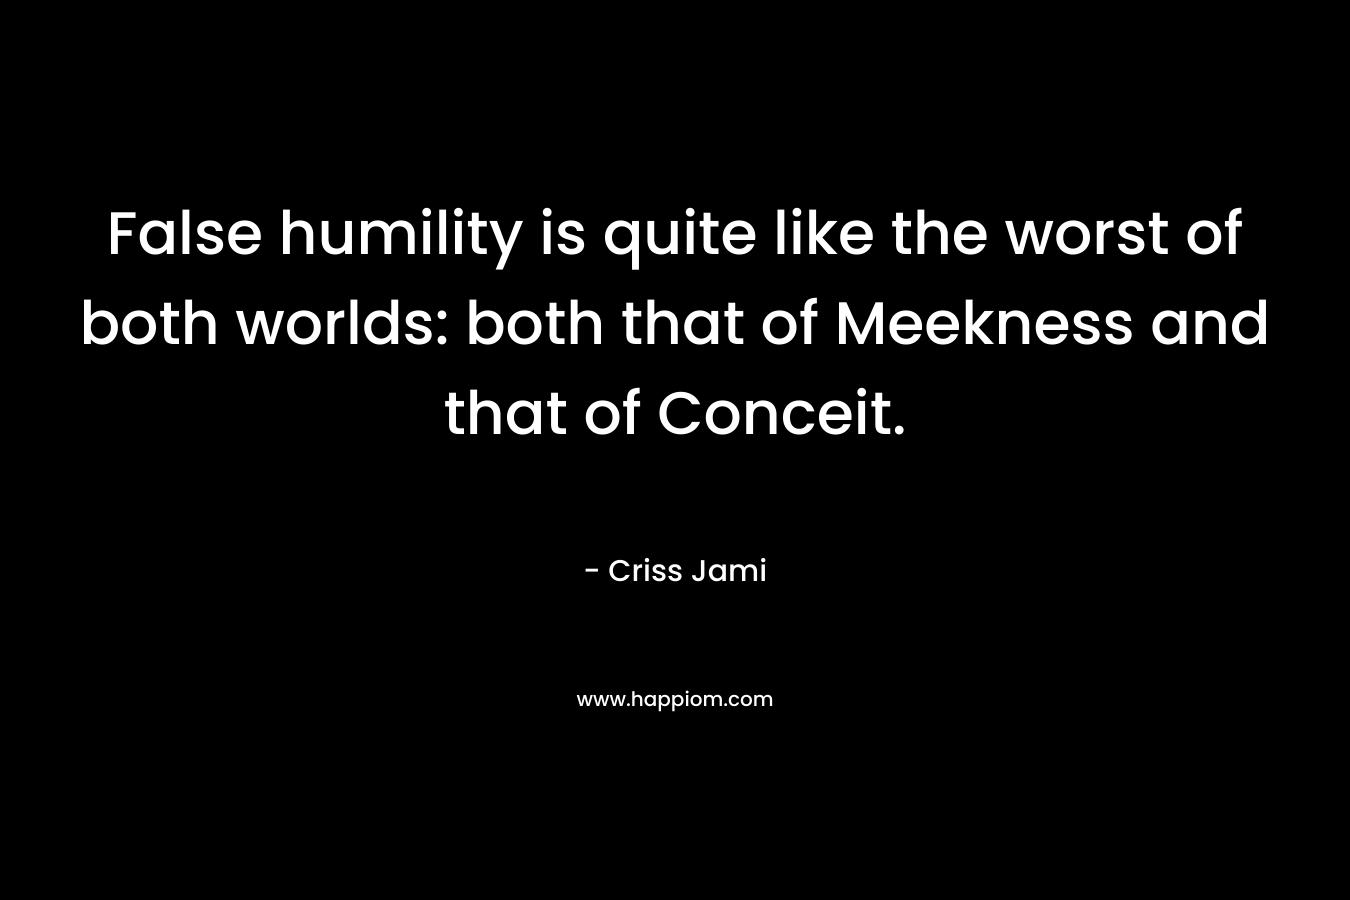 False humility is quite like the worst of both worlds: both that of Meekness and that of Conceit.